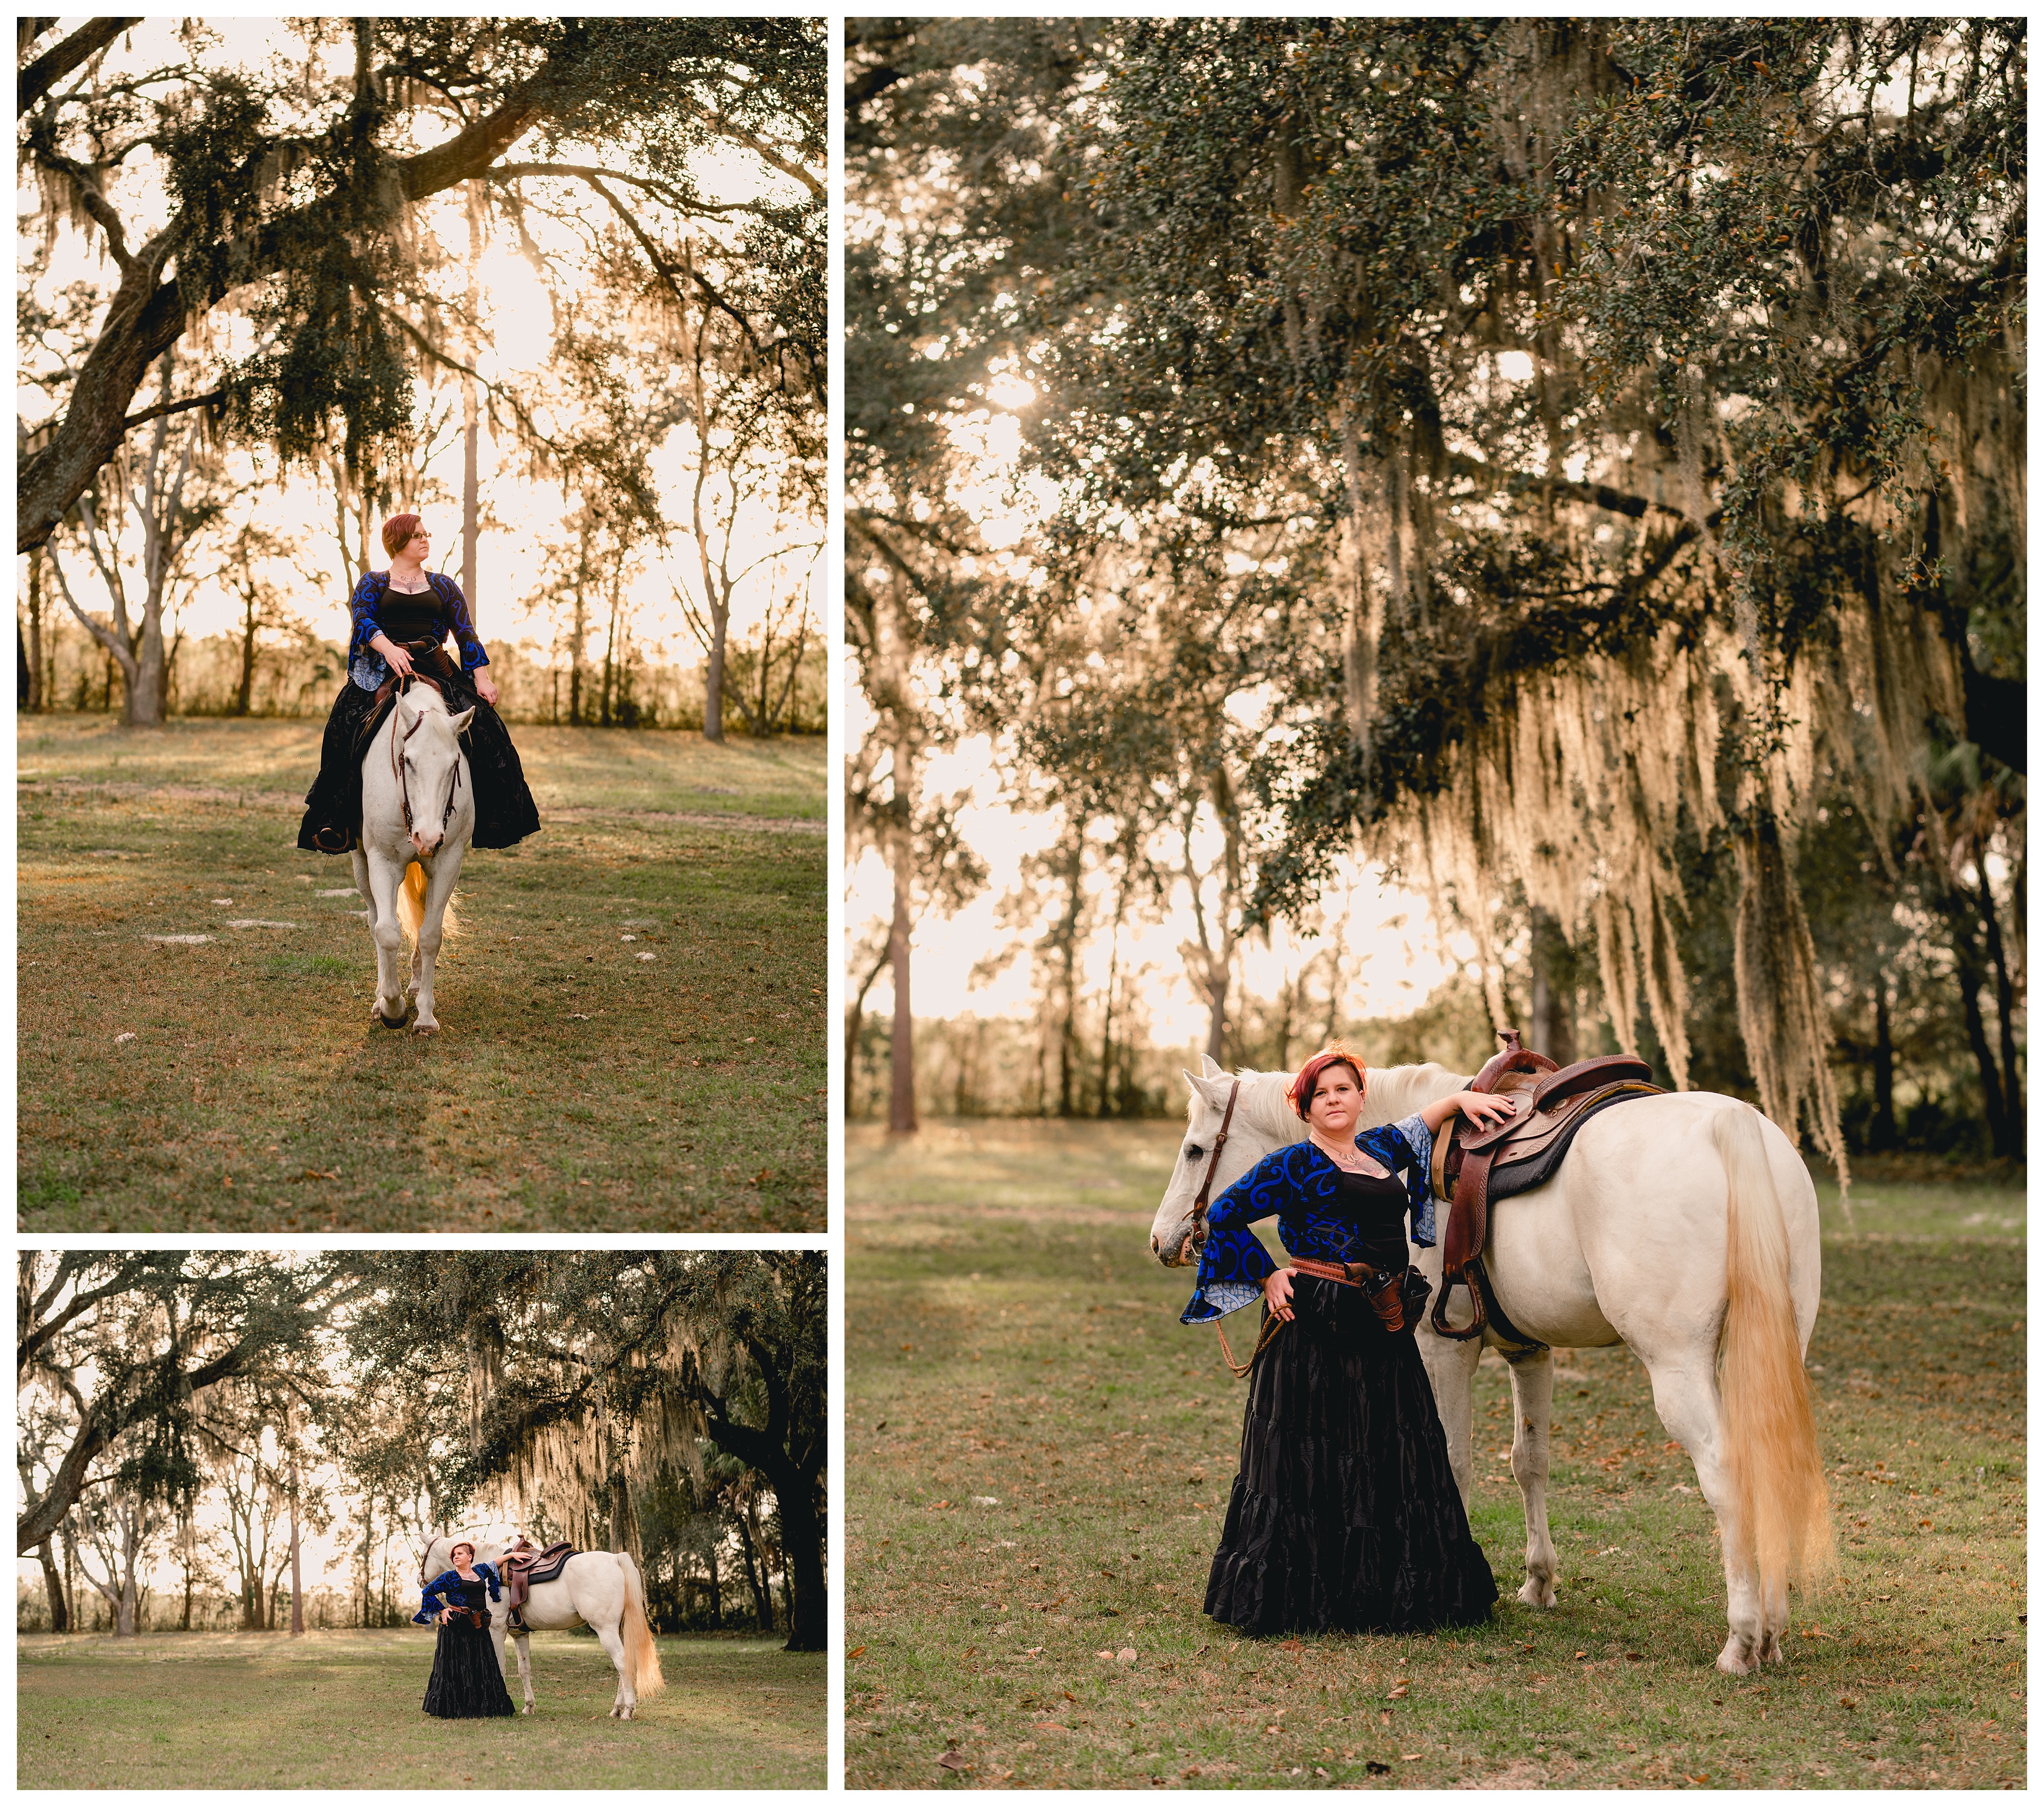 Oak trees and horse and rider pictures in Florida during sunset. Shelly Williams Photography